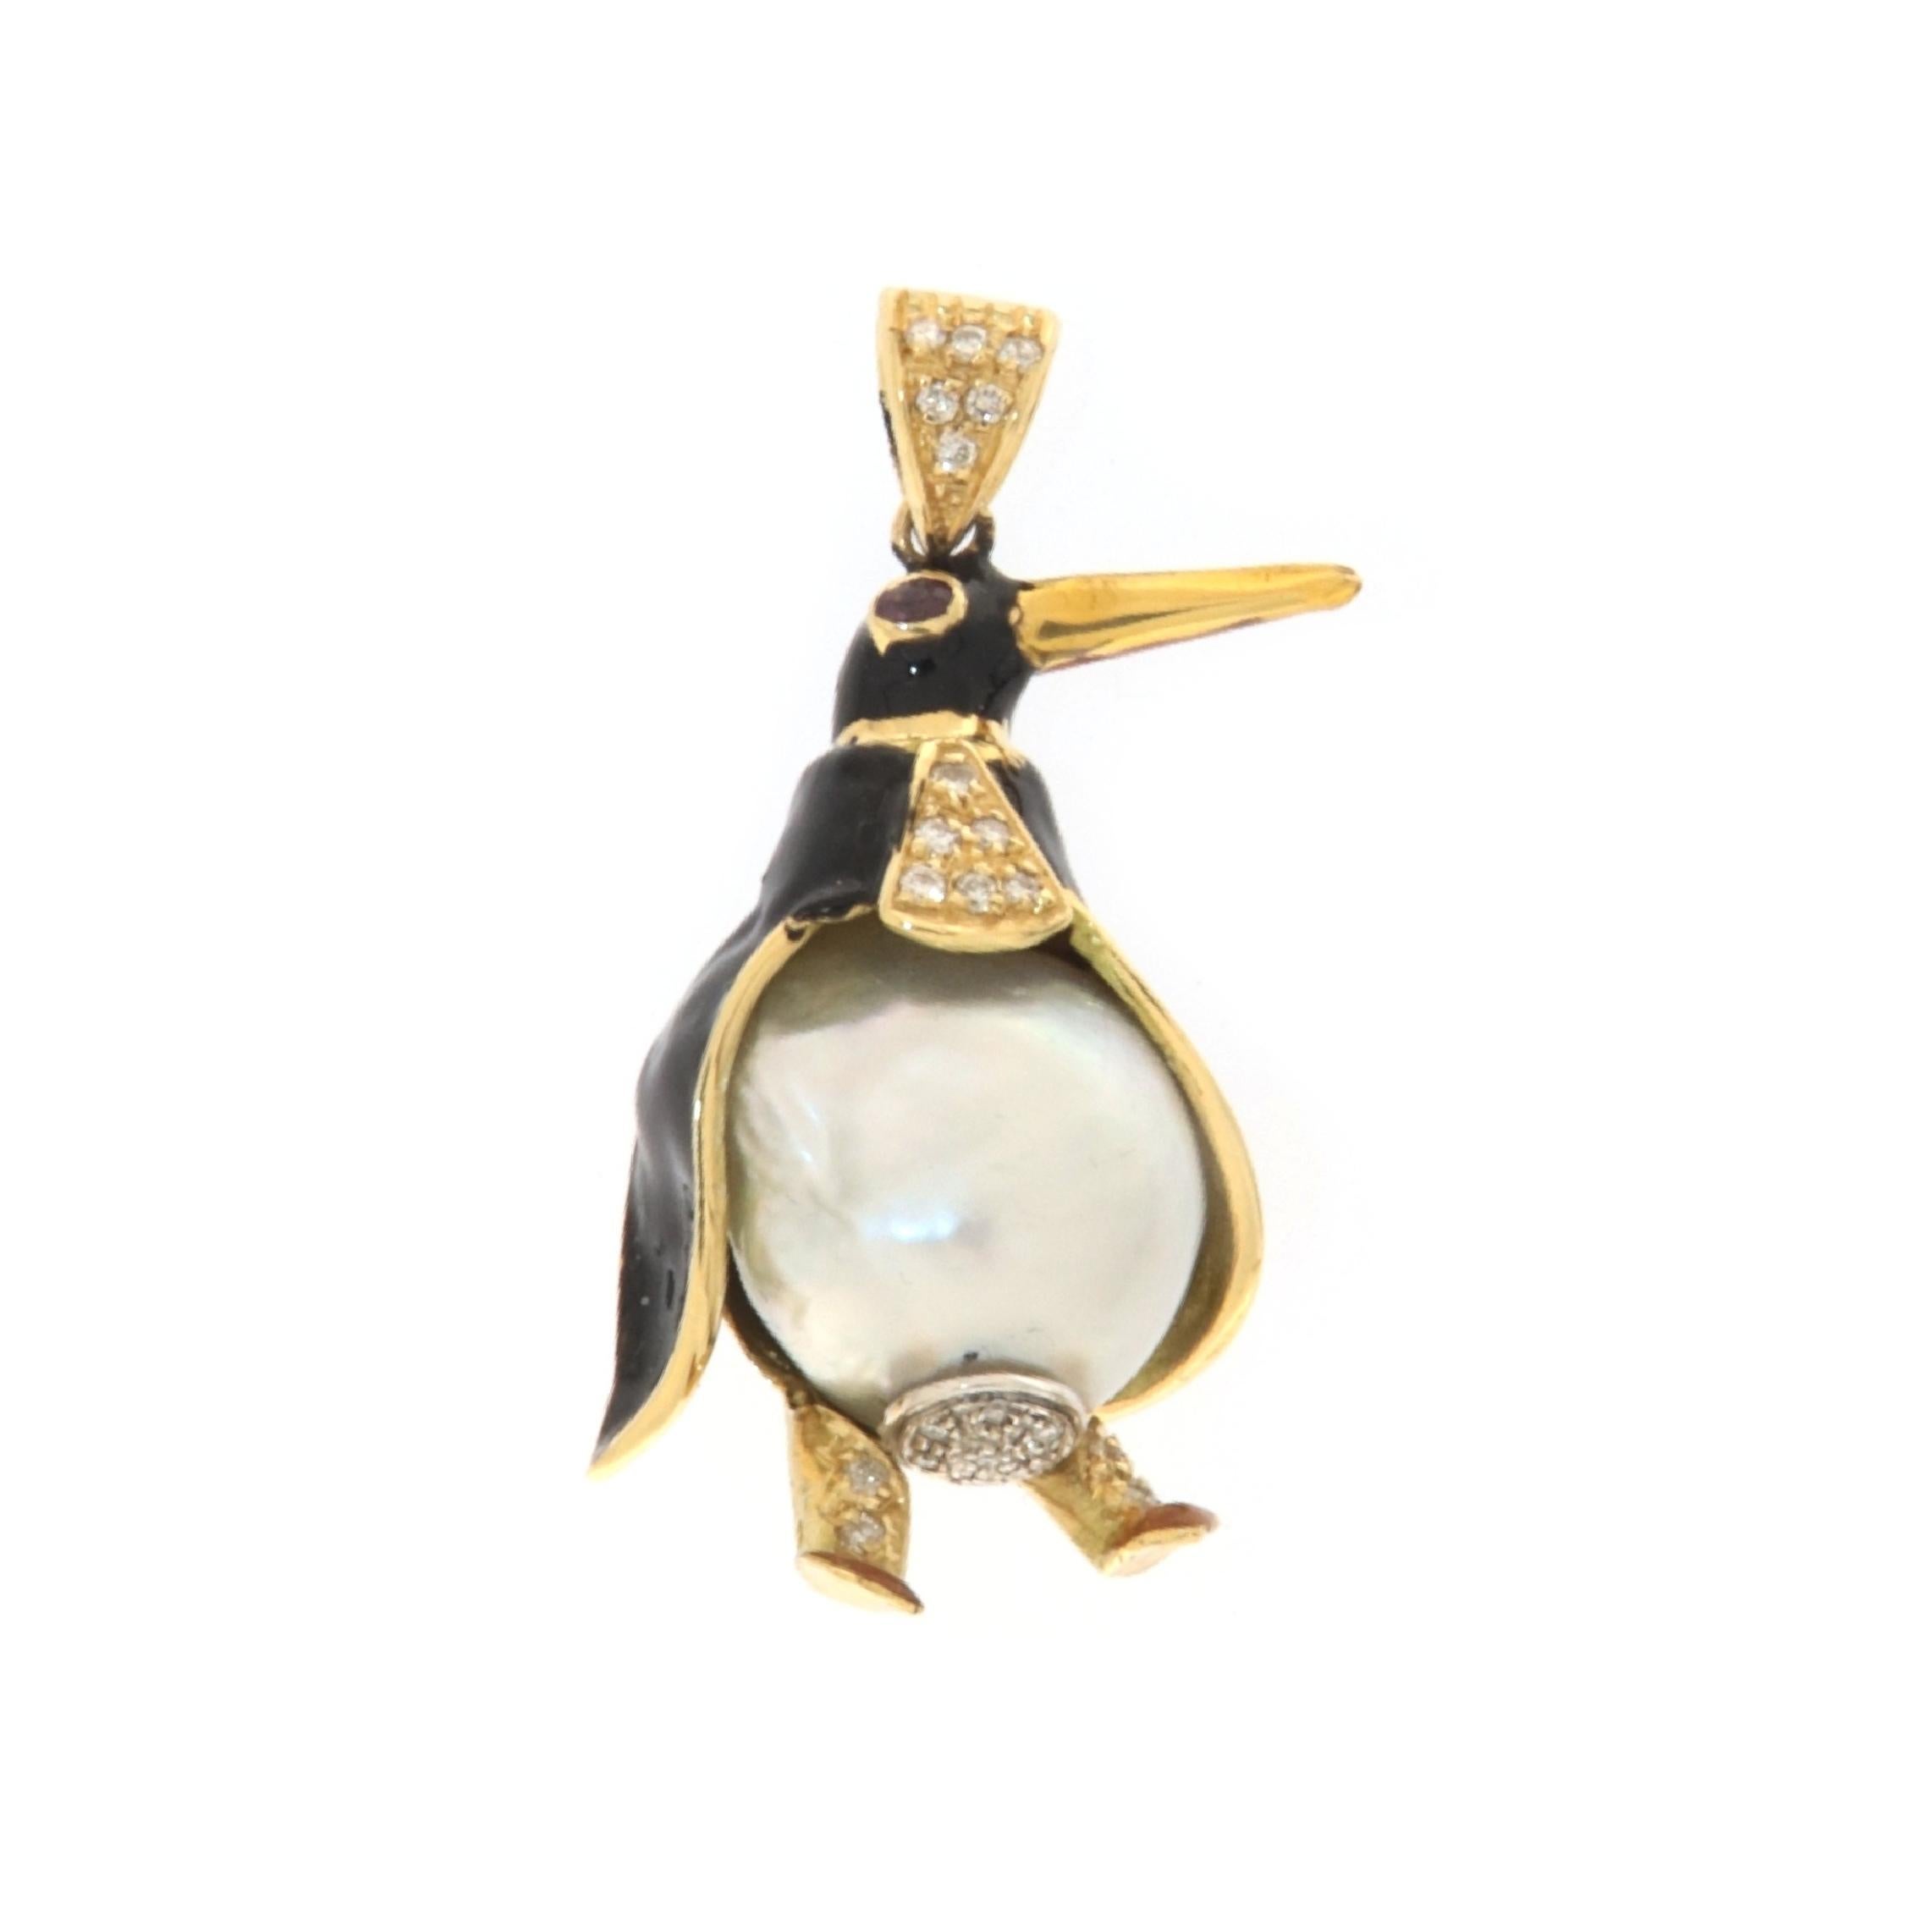 This charming penguin-shaped pendant, crafted in 18-karat yellow gold, is a celebration of craftsmanship and uniqueness. With its figure enameled in black through the refined technique of fire enamel, this jewel captures the playful essence and